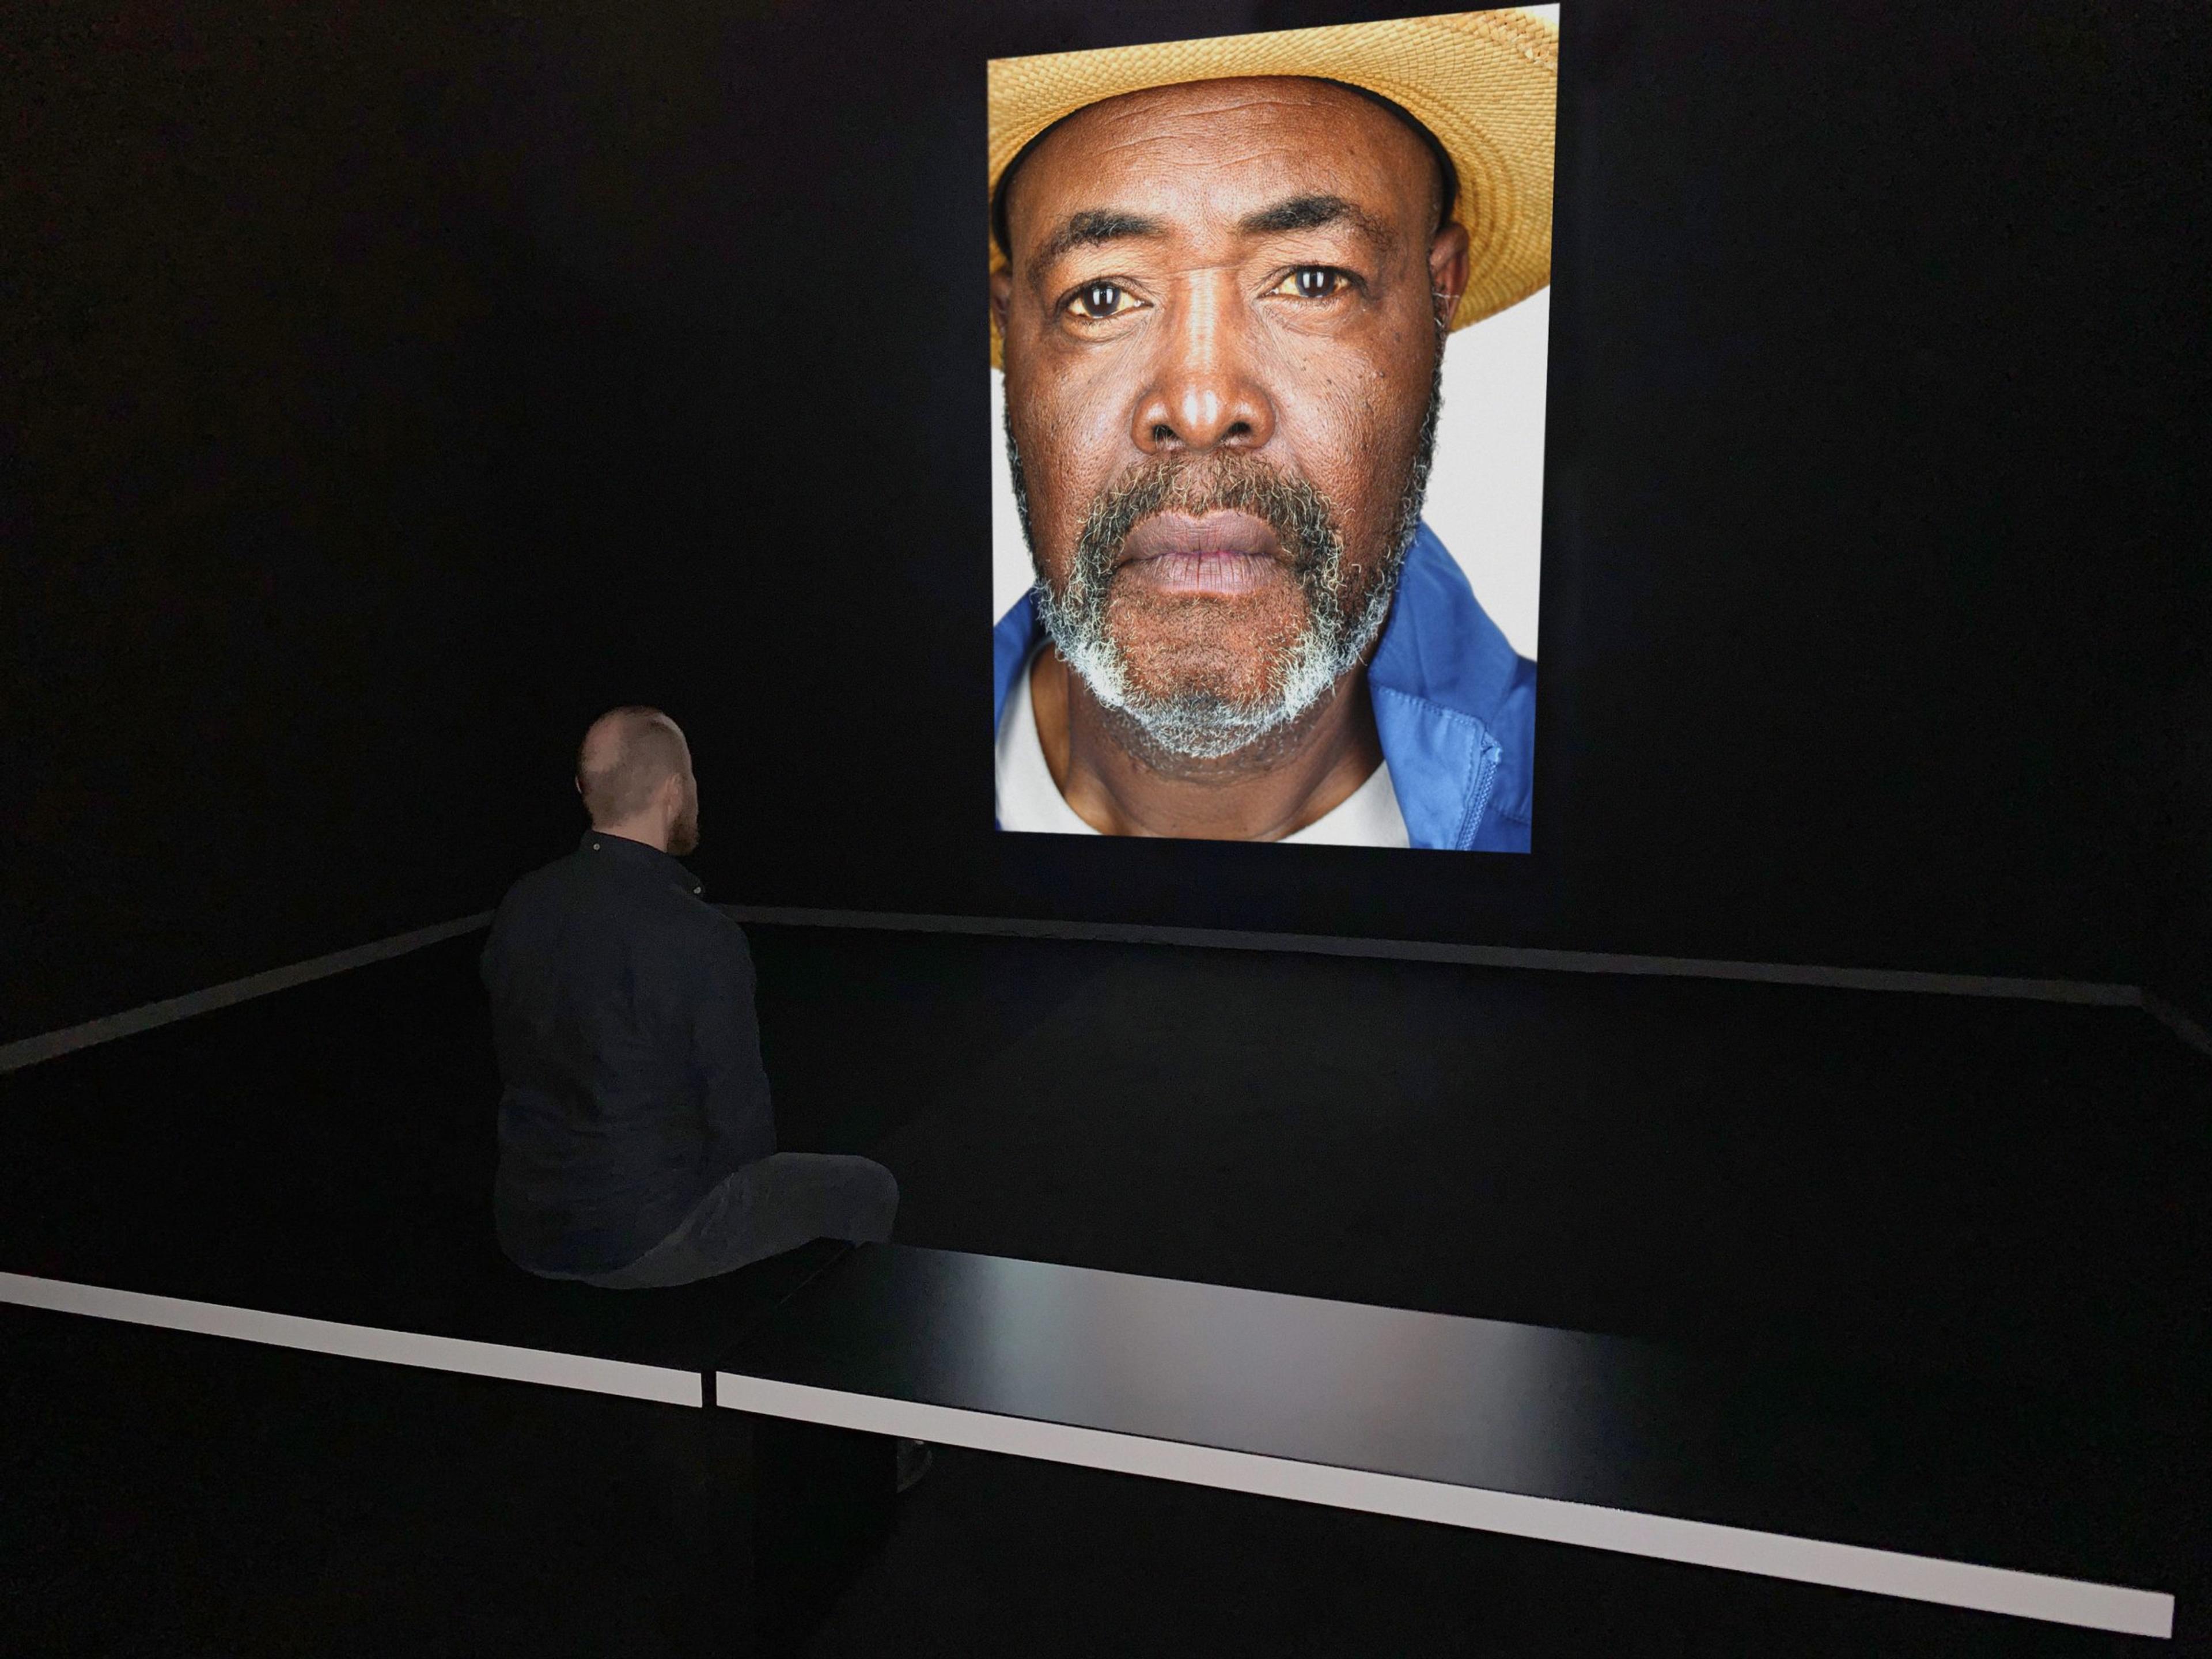 An observer looking at at an image projected in a dark room of a portrait of a man wearing a straw hat